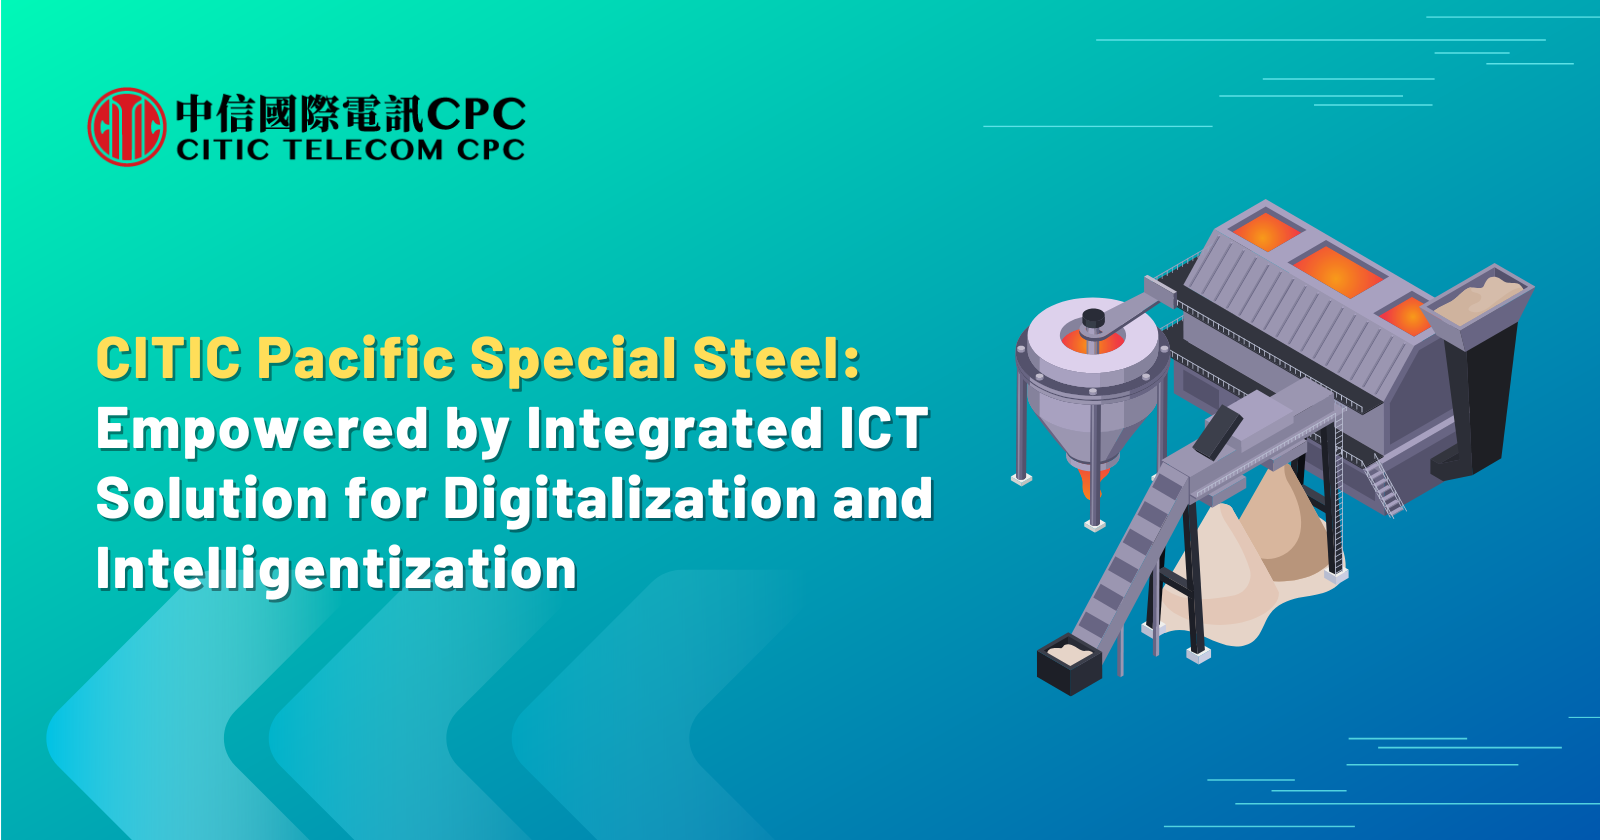 CITIC Pacific Special Steel: Empowered by Integrated ICT Solution for Digitalization and Intelligentization